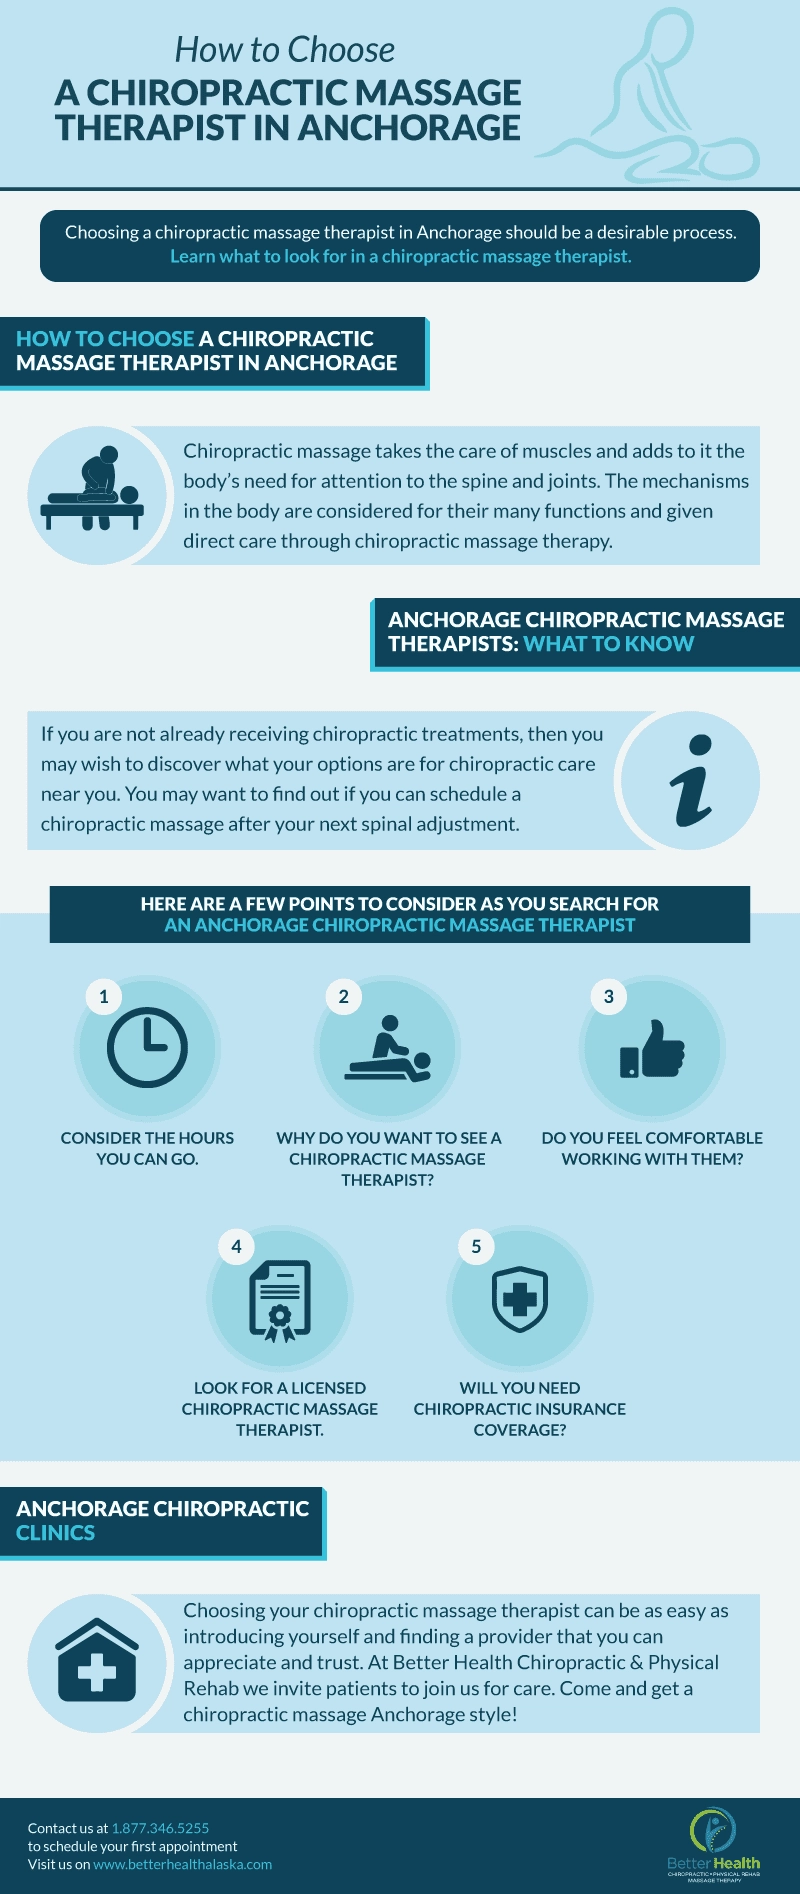 How to Choose a Chiropractic Massage Therapist in Anchorage Infographic